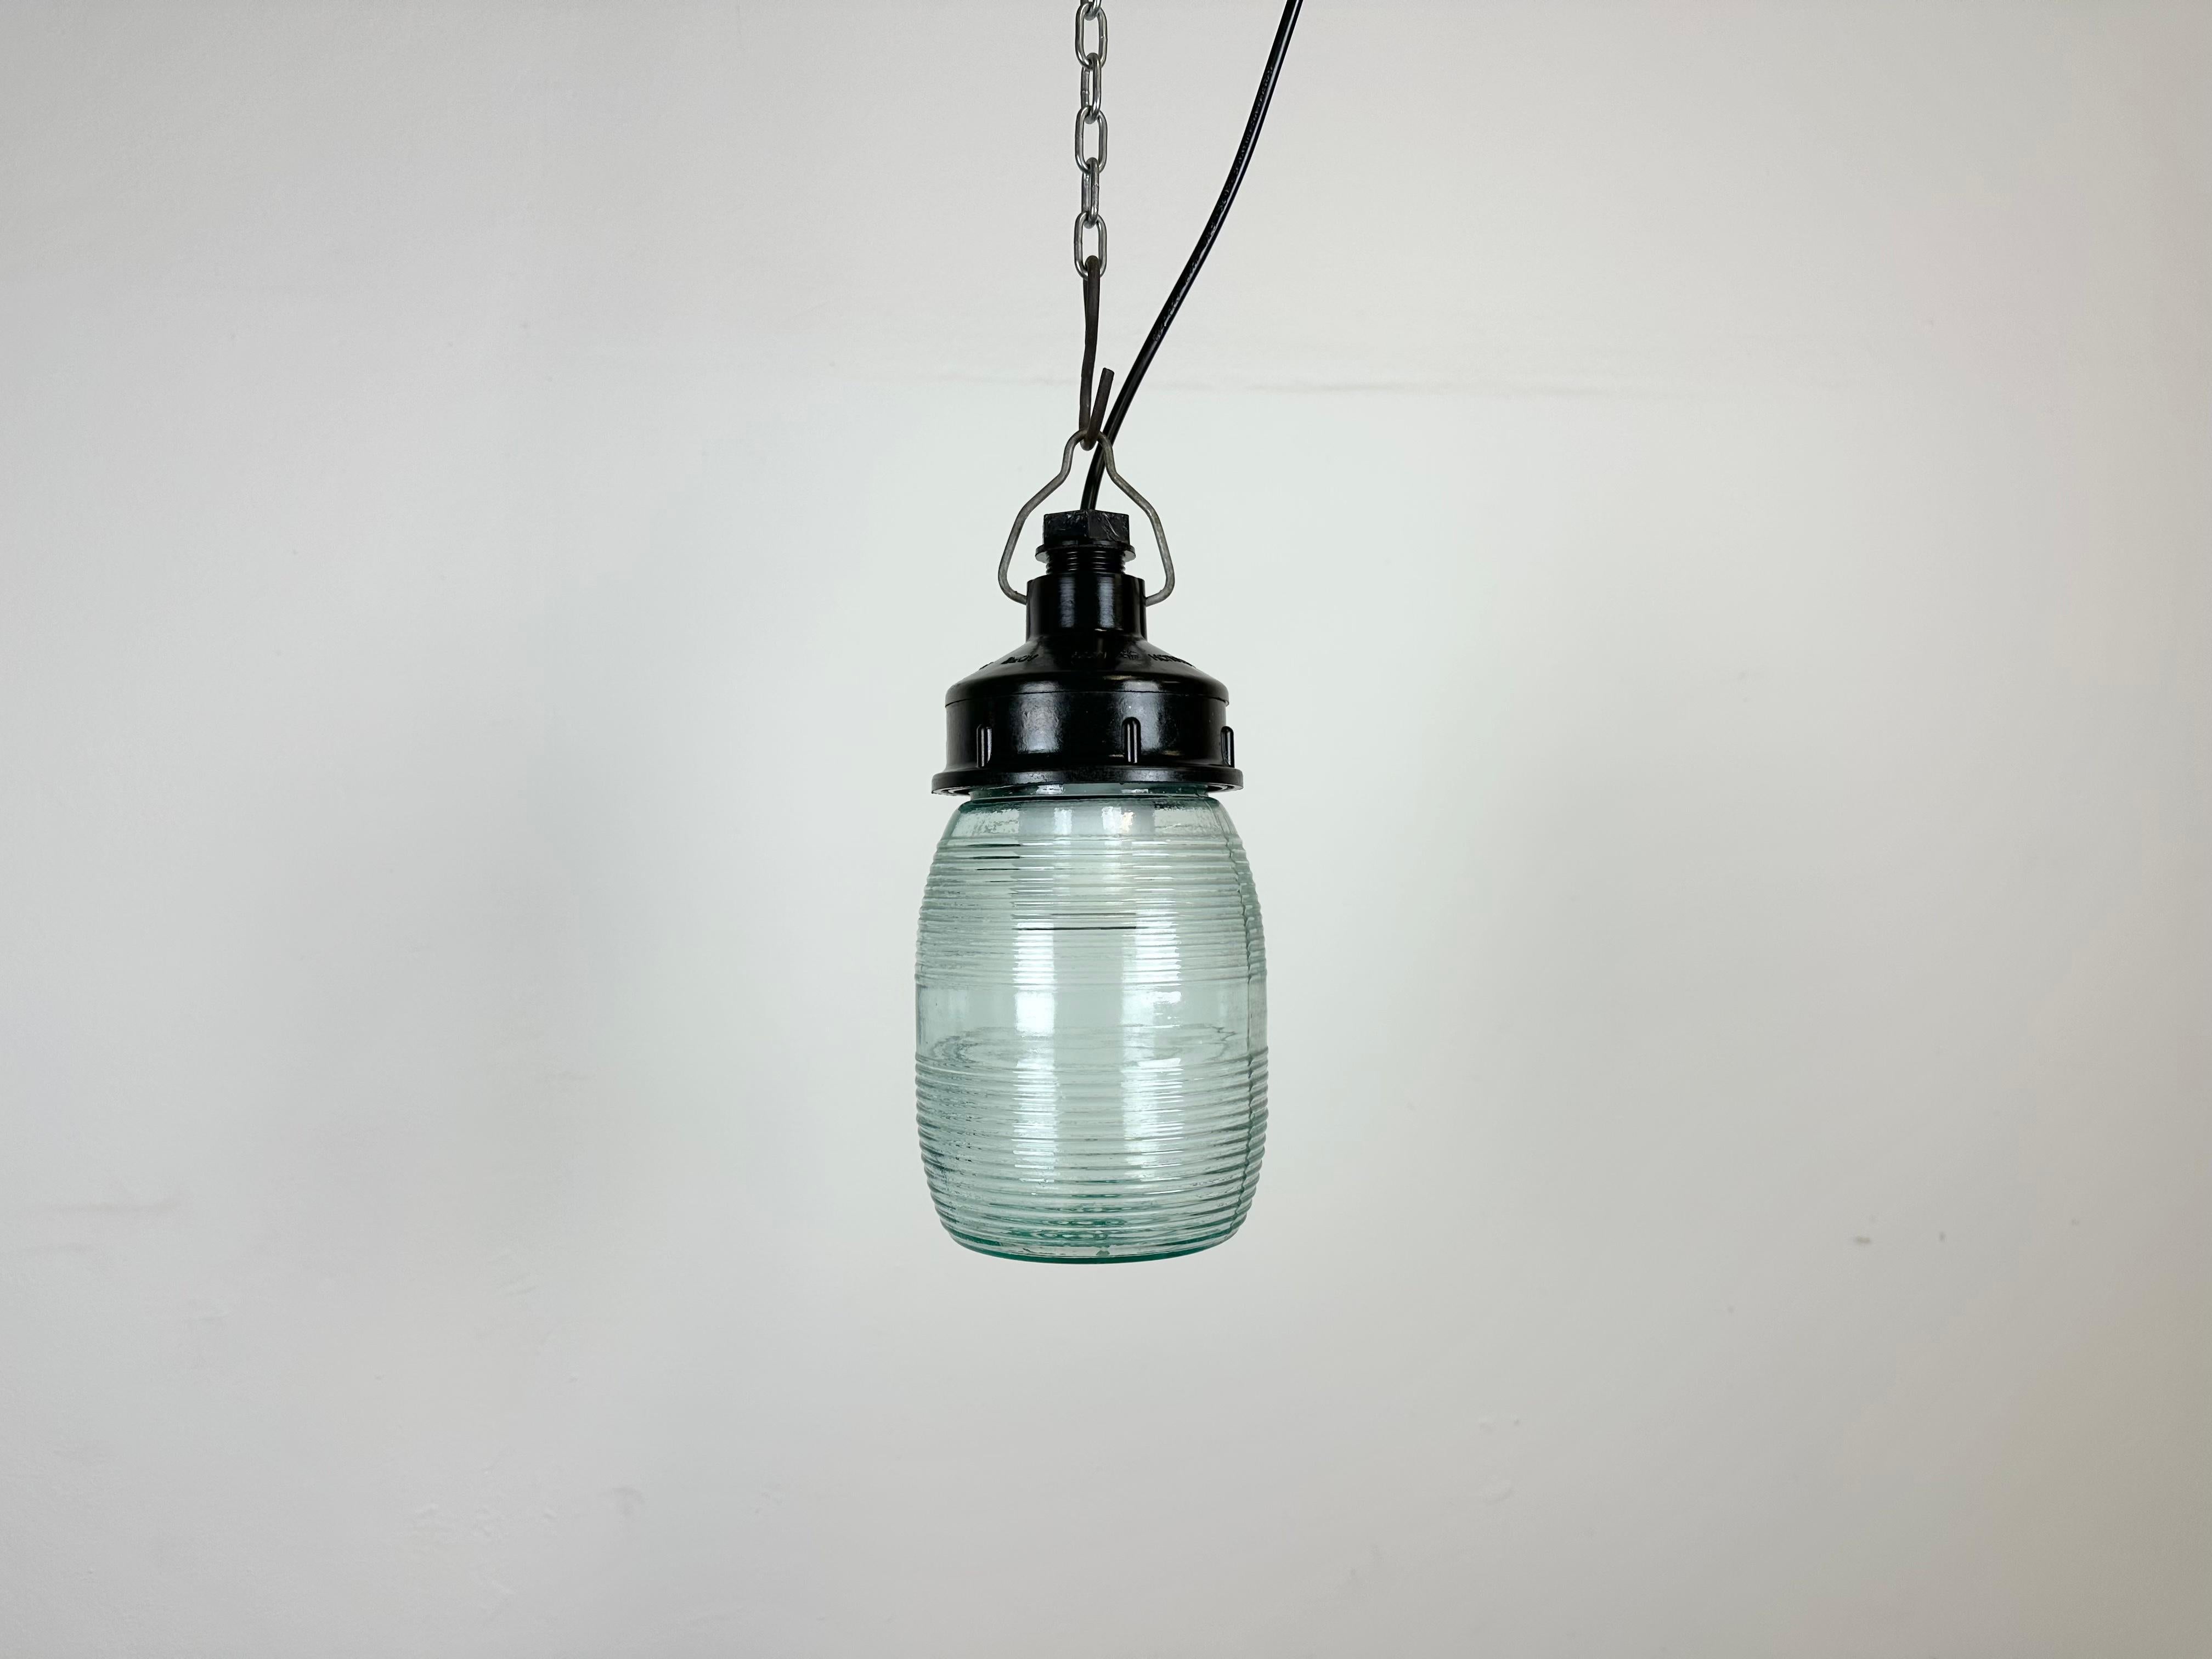 Vintage industrial light made in former Soviet Union during the 1970s. It features a brown bakelite top and a light green ribbed glass cover. The socket requires E27 / E26 light bulbs. New wire. The weight of the lamp is 0,8 kg.